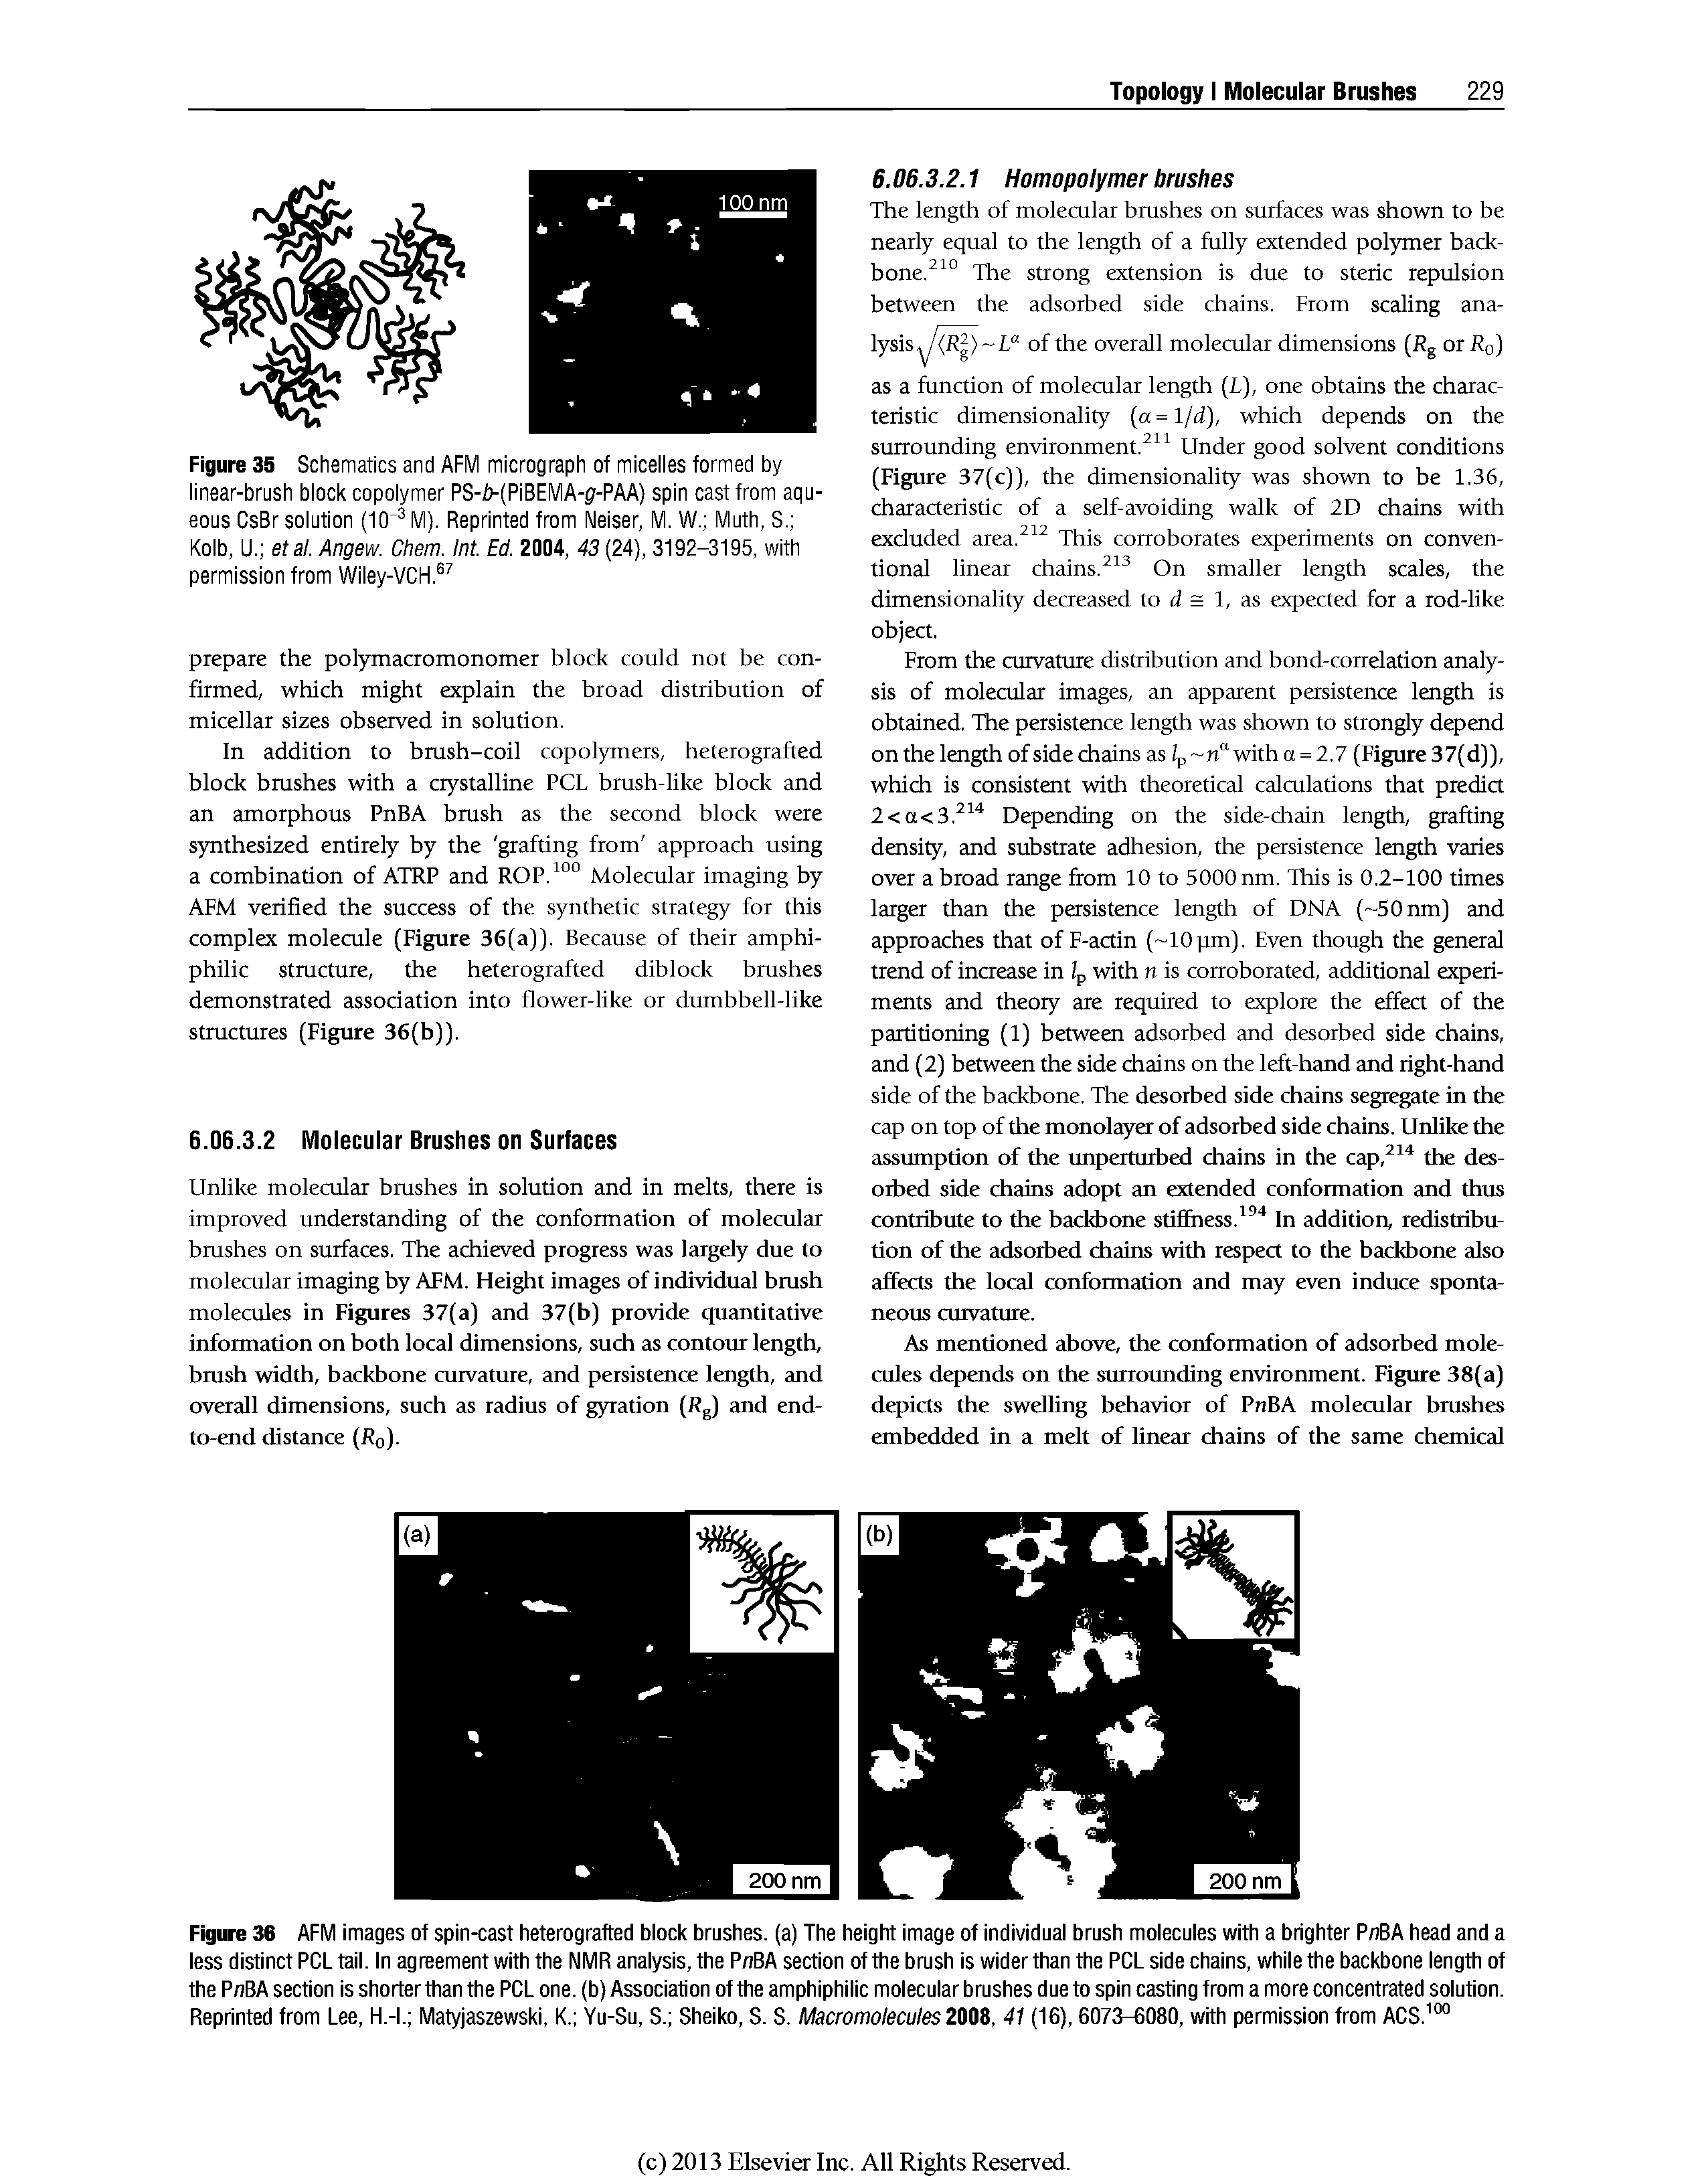 Figure 35 Schematics and AFM micrograph of micelles formed by linear-brush block copolymer PS-f>(PIBEMA-g(-PAA) spin cast from aqueous CsBr solution (lO M). Reprinted from Nelser, M. W. Muth, S. Kolb, U. etal. Angew. Chem. Int. Ed. 2004, 43 (24), 3192-3195, with permission from Wiley-VCH. ...